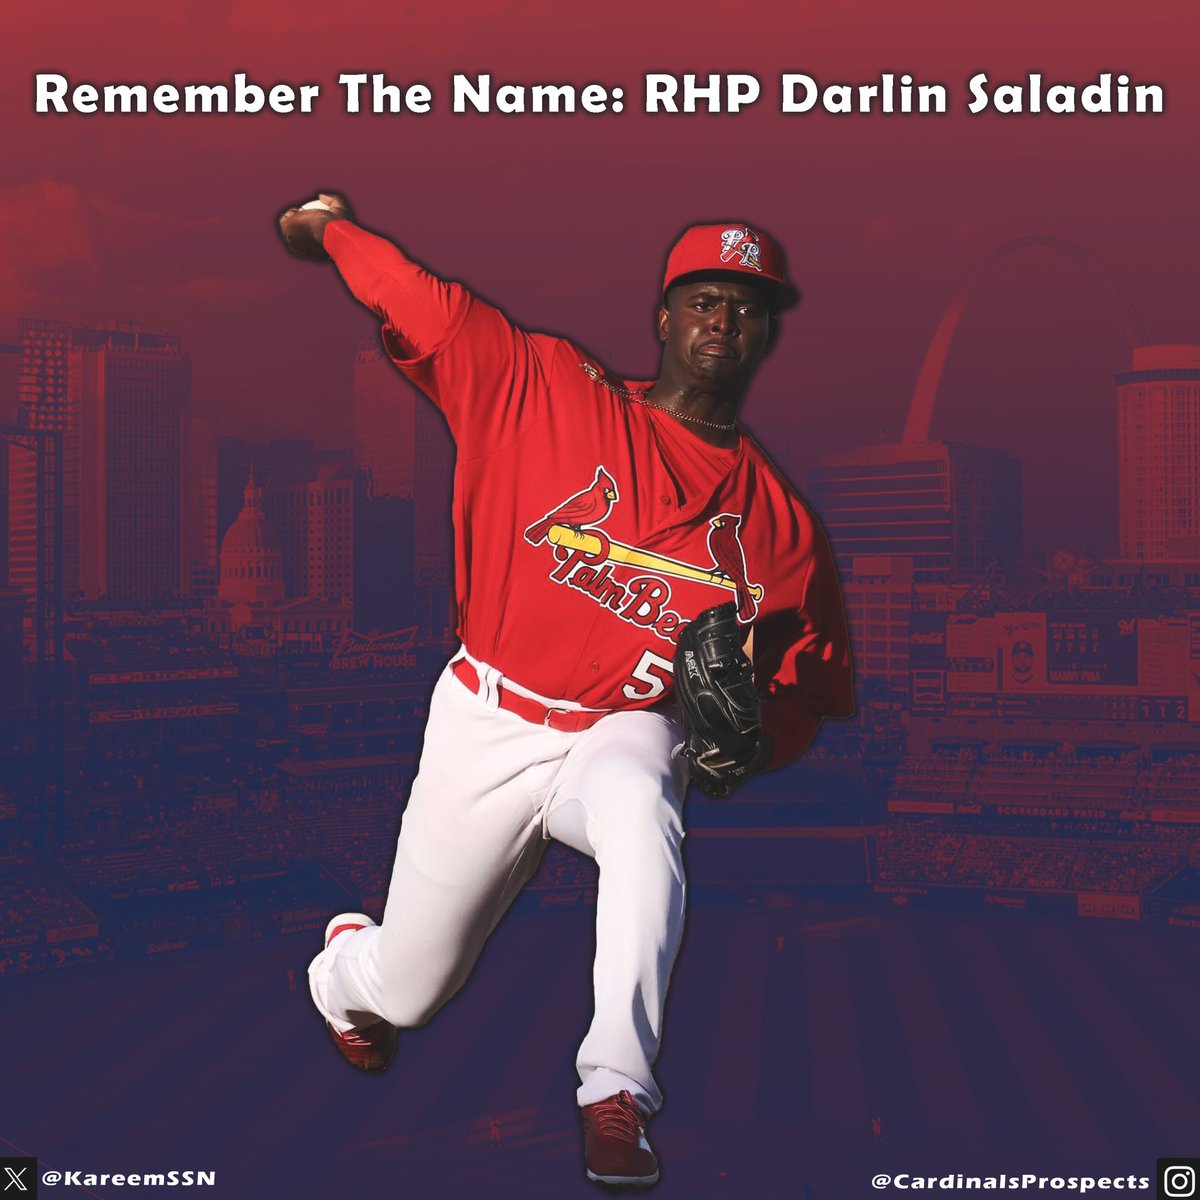 The #STLCards have a fascinating 21-year-old starting pitching prospect who possesses an elite four-seam fastball

Read more about him here: redbirdrants.com/posts/the-reme…